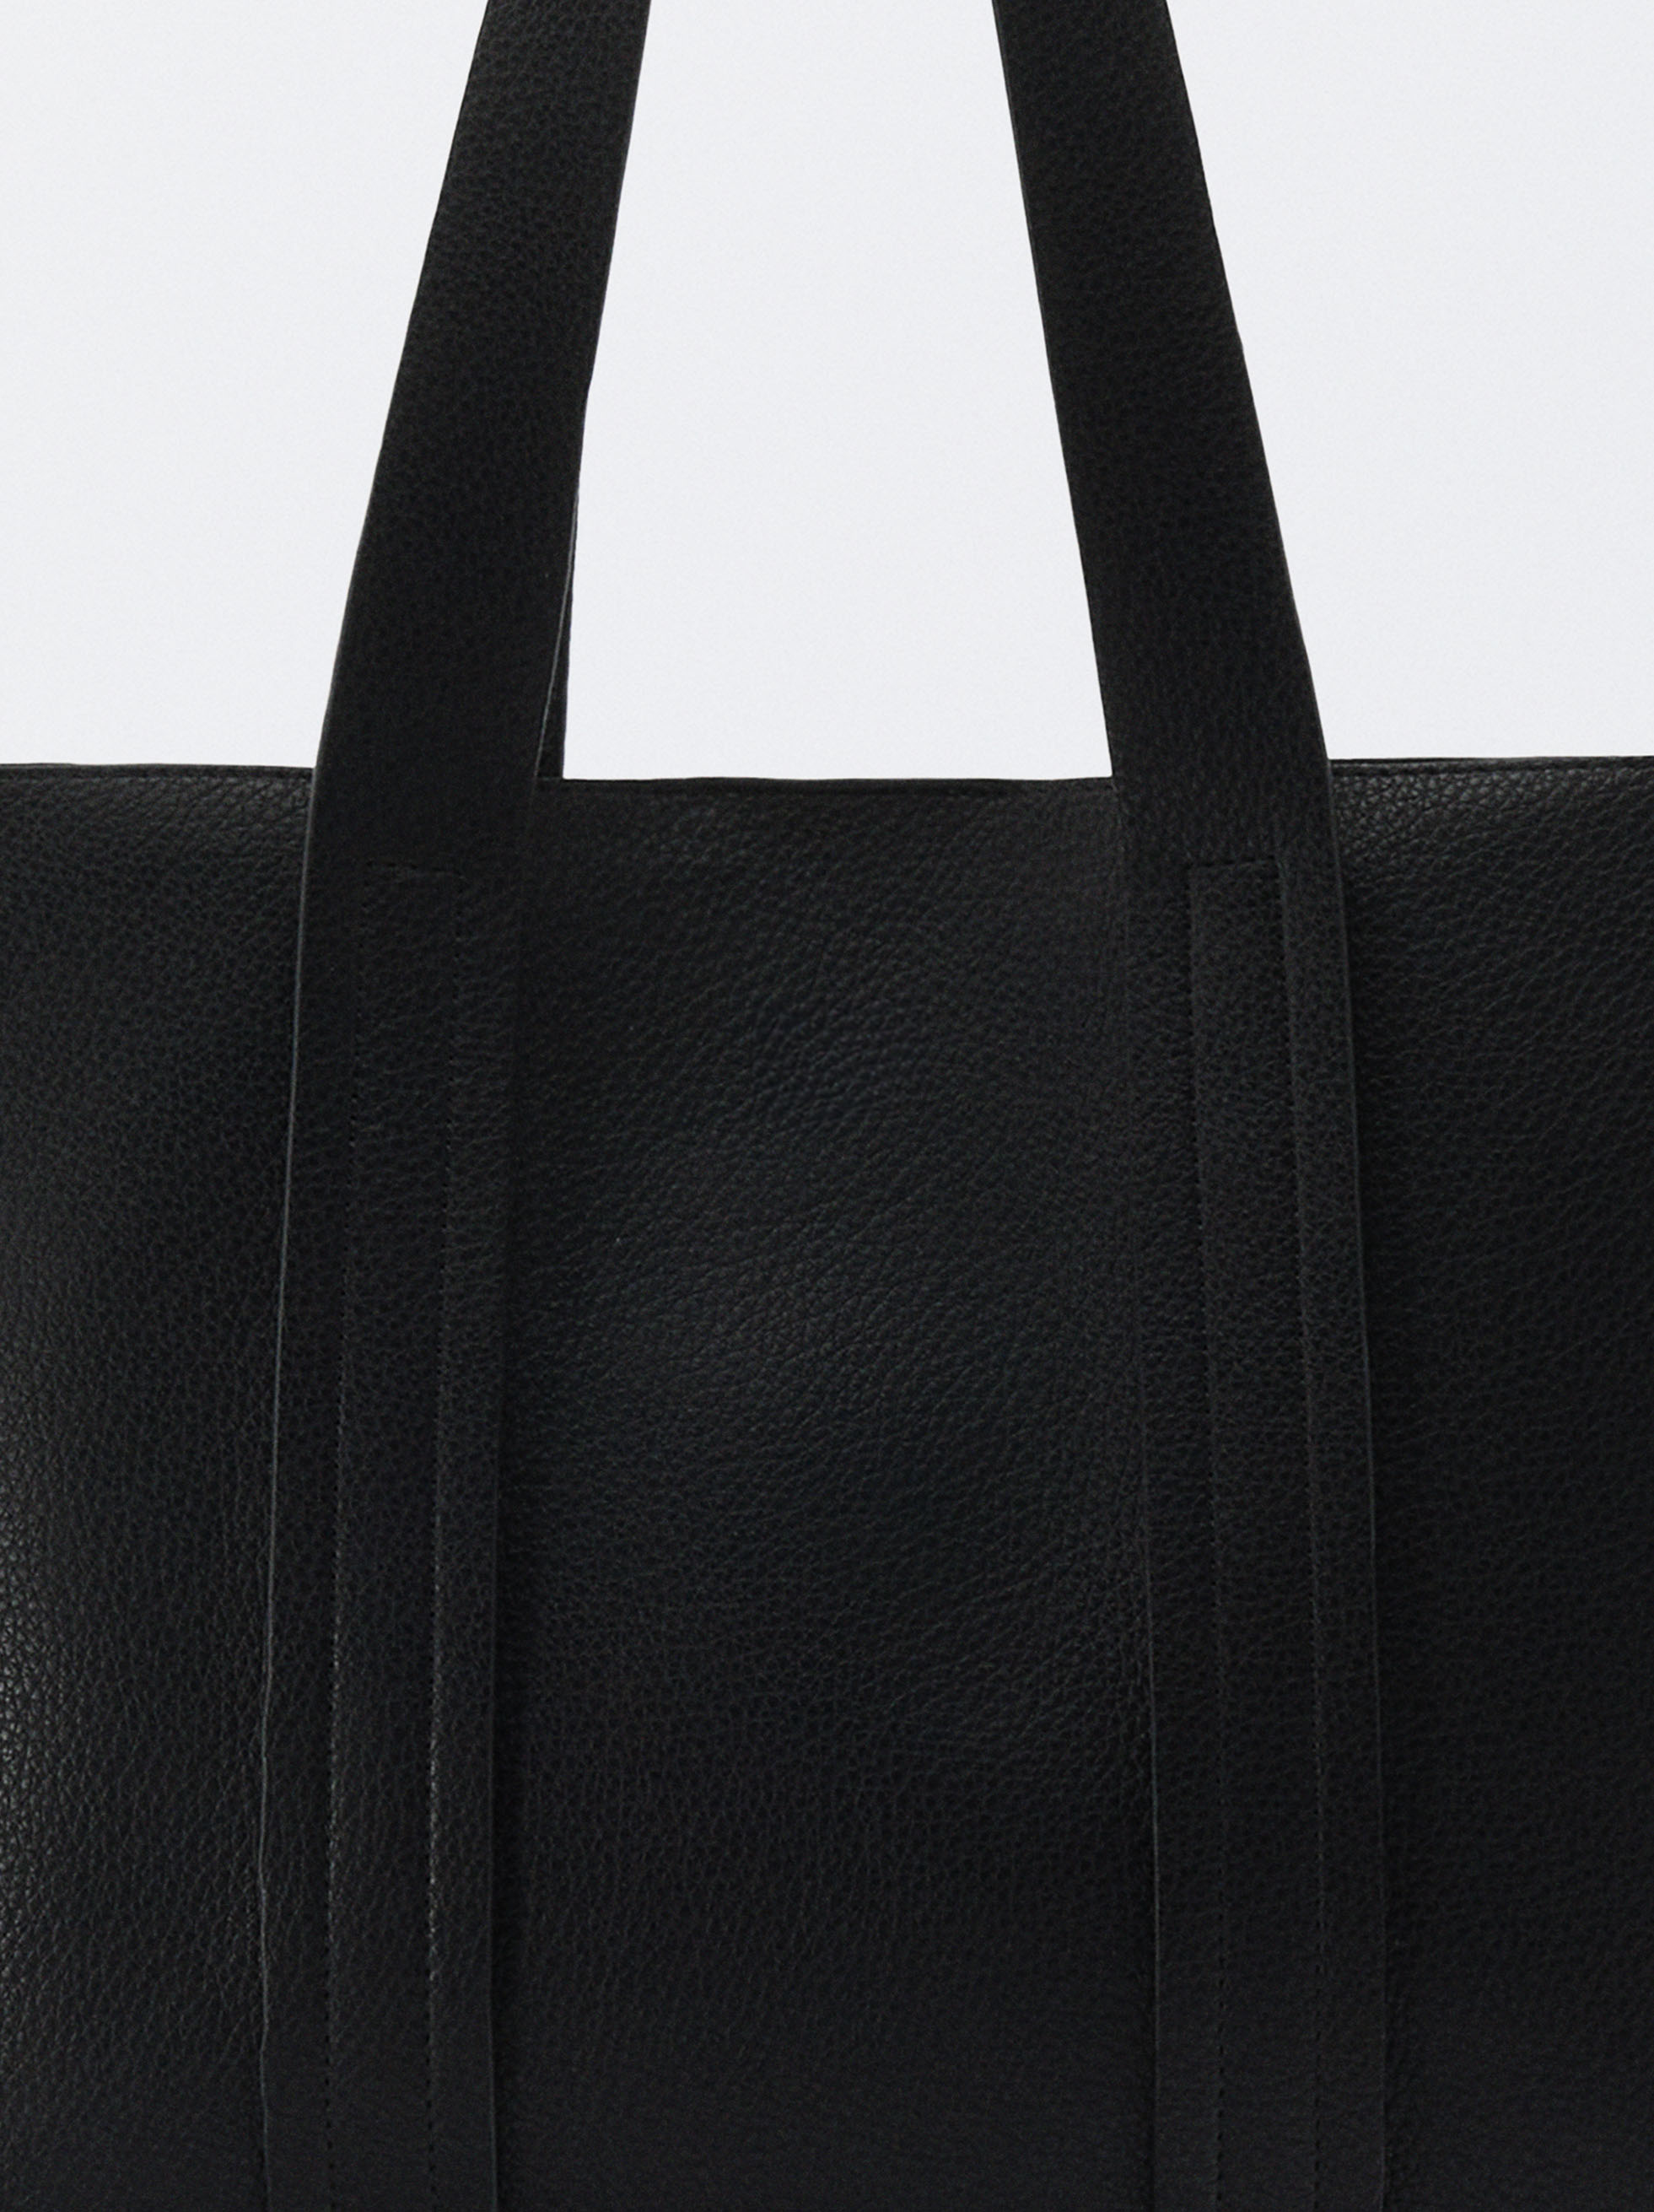 Bolso Shopper Everyday Personalizable image number 5.0